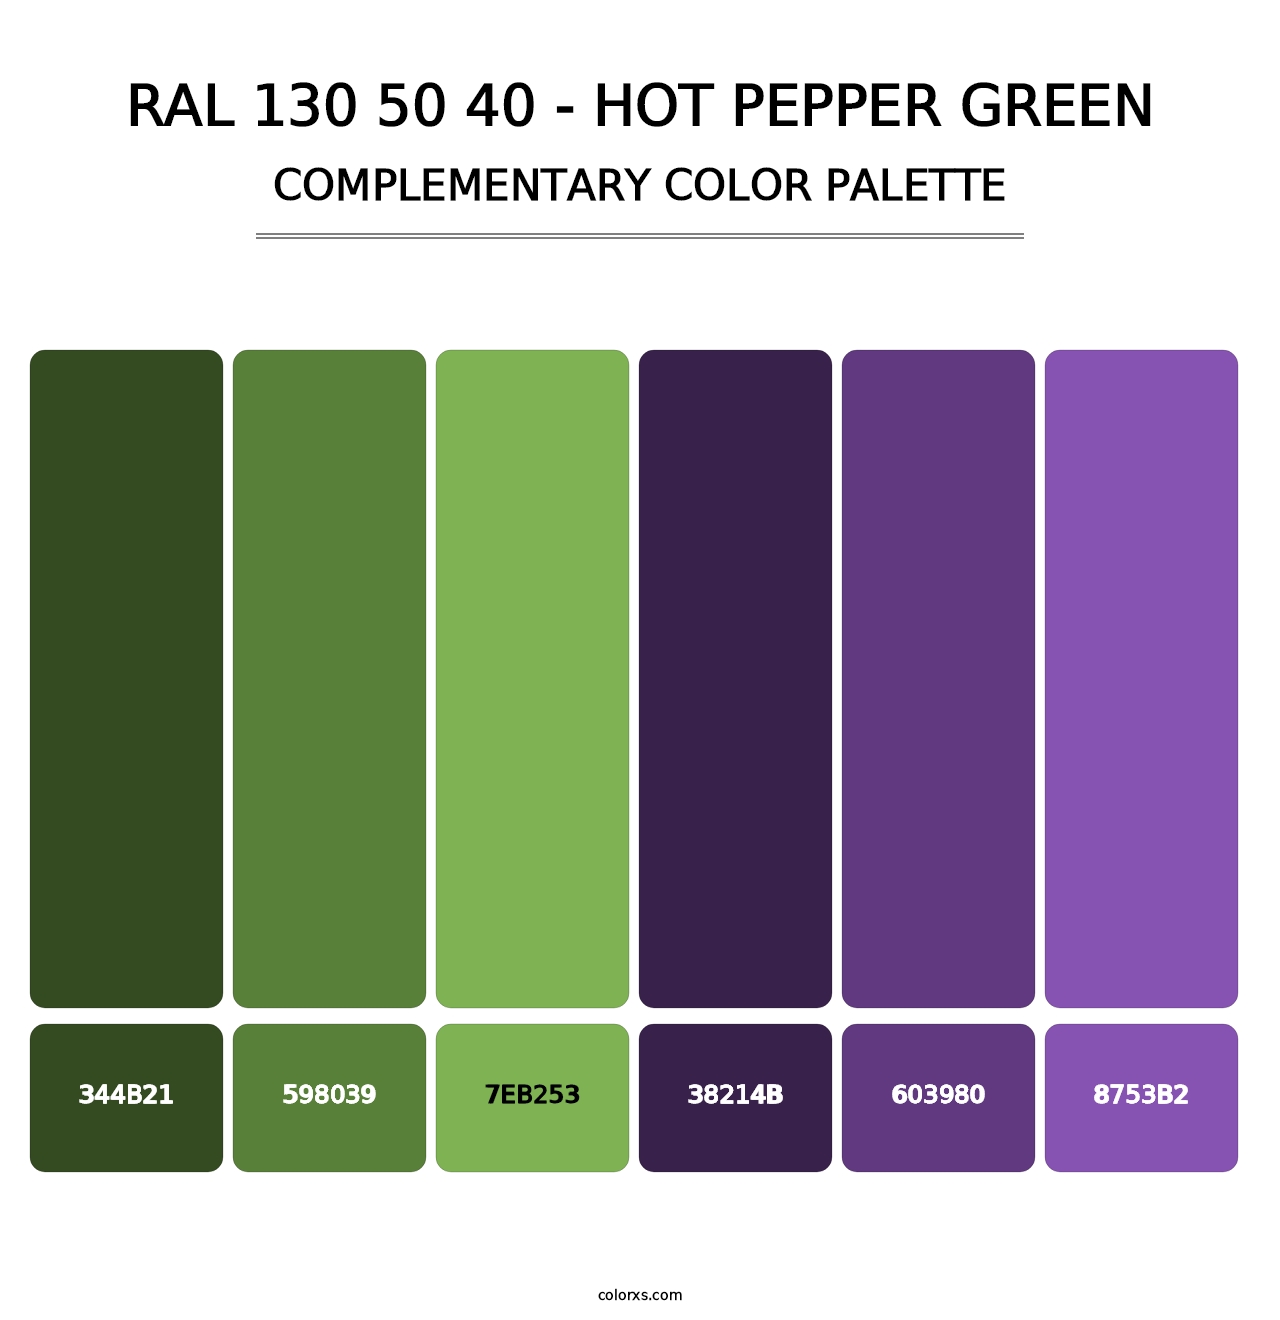 RAL 130 50 40 - Hot Pepper Green - Complementary Color Palette